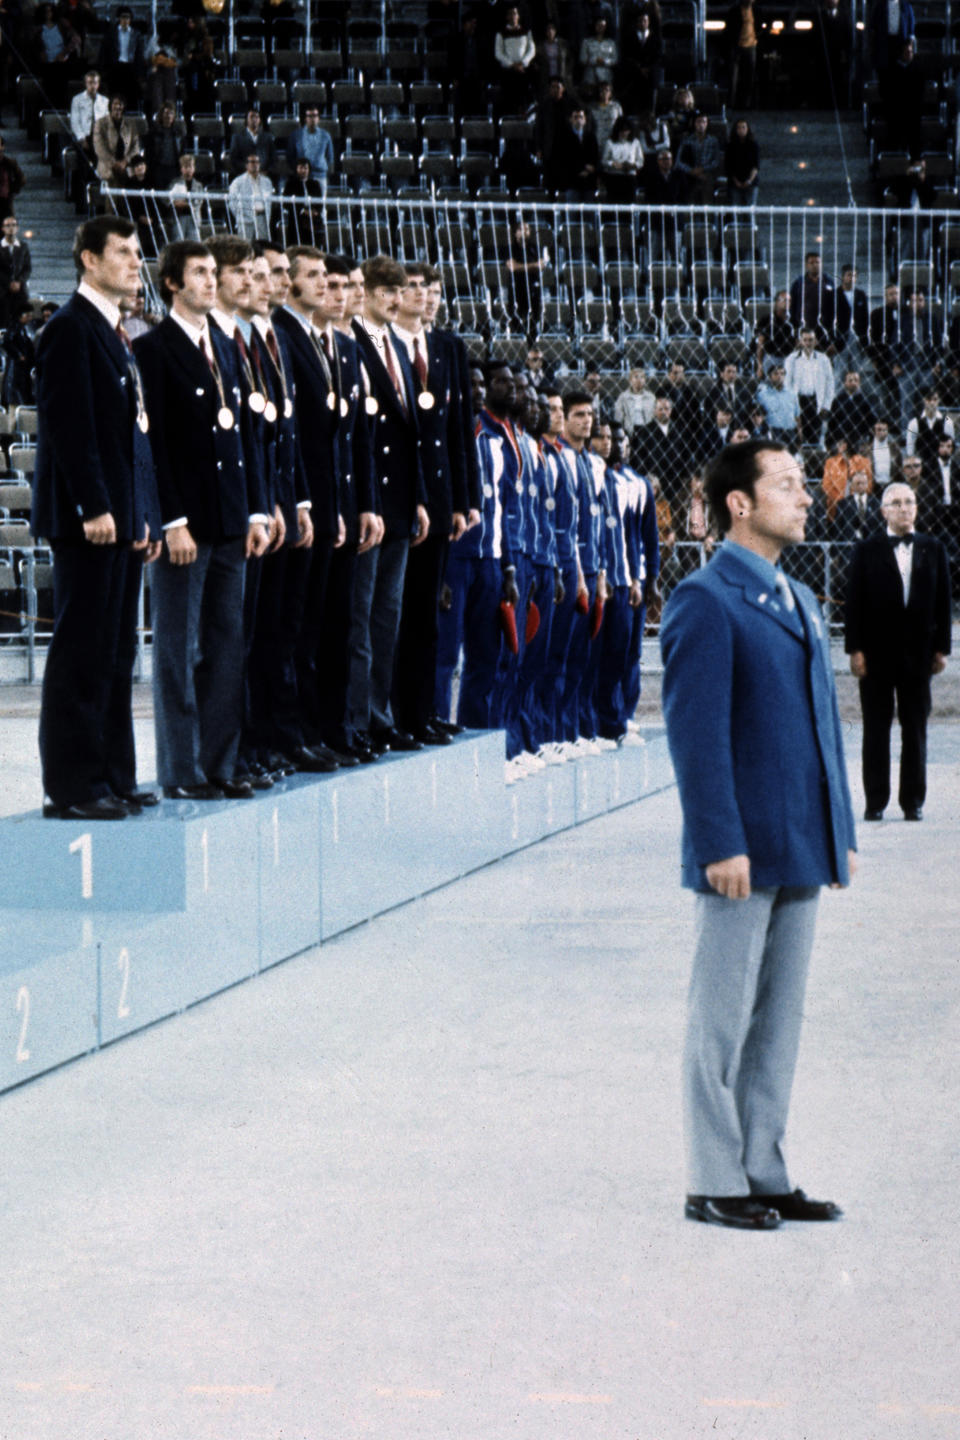 FILE - The Soviet Union basketball team stands on the podium after receiving the Olympic gold medal Sept. 10, 1972, in Munich, flanked by the bronze-winning Cubans, right, and a vacant place where the U.S. team, officially given the Olympic silver, was supposed to appear. Members of the 1972 U.S. Olympic men's basketball team have talked about finally retrieving those silver medals they vowed to never accept. No, they still don't want them for themselves. They believe the medals belong in the Naismith Memorial Basketball Hall of Fame, but the latest attempt to get them from the International Olympic Committee has been thwarted.(Pool photo via AP, File)